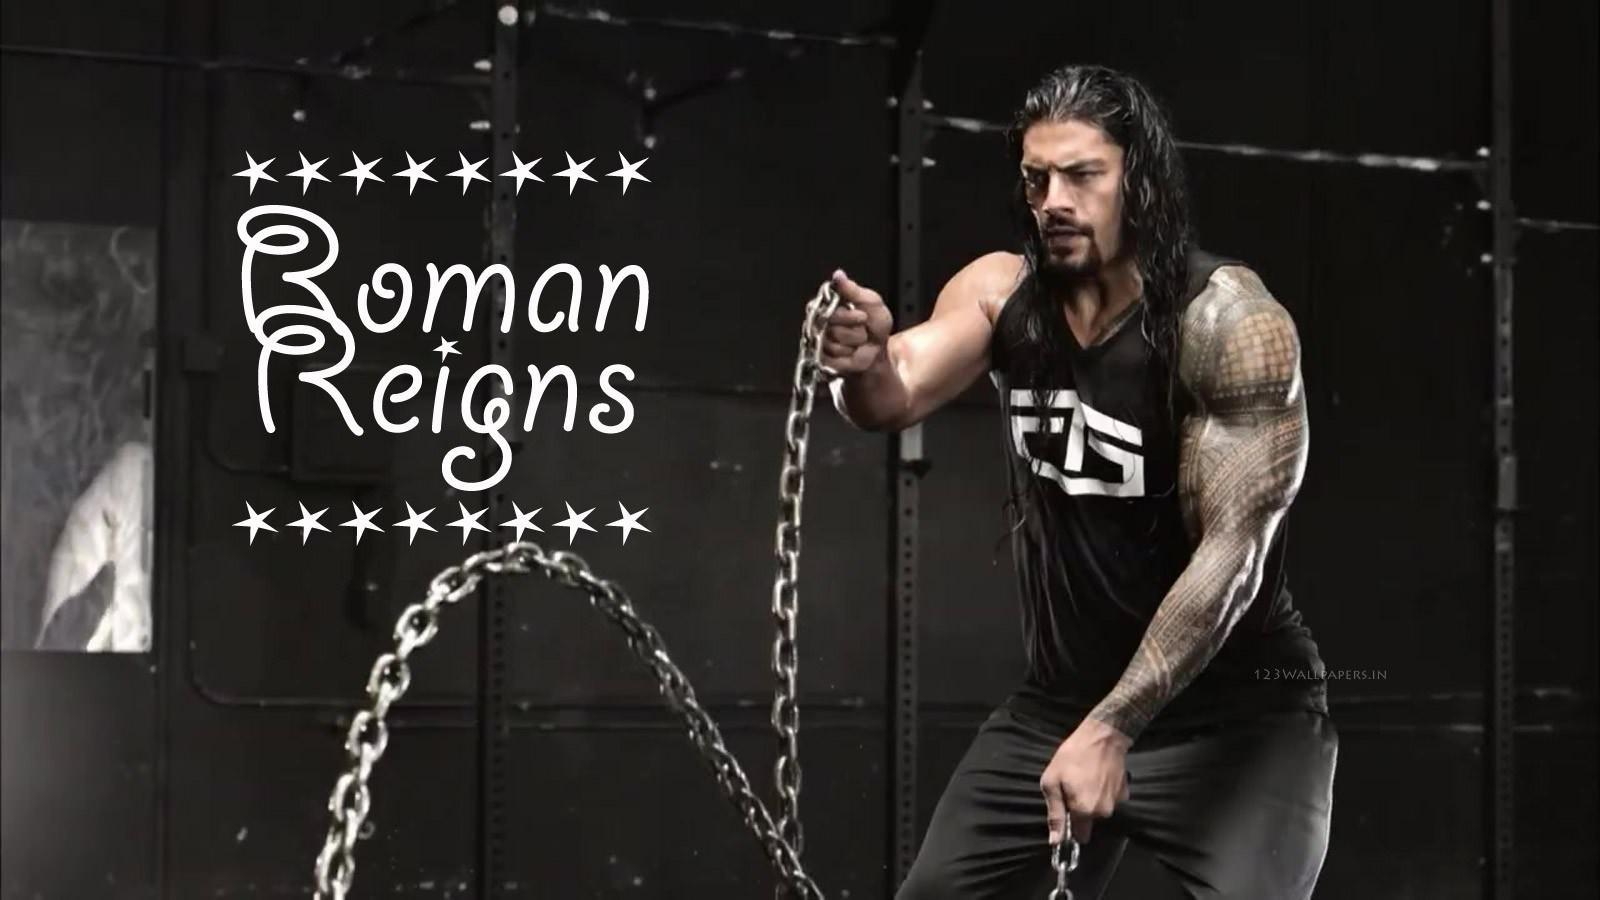 Free Download Cool Roman Reigns Image, Picture & Wallpaper